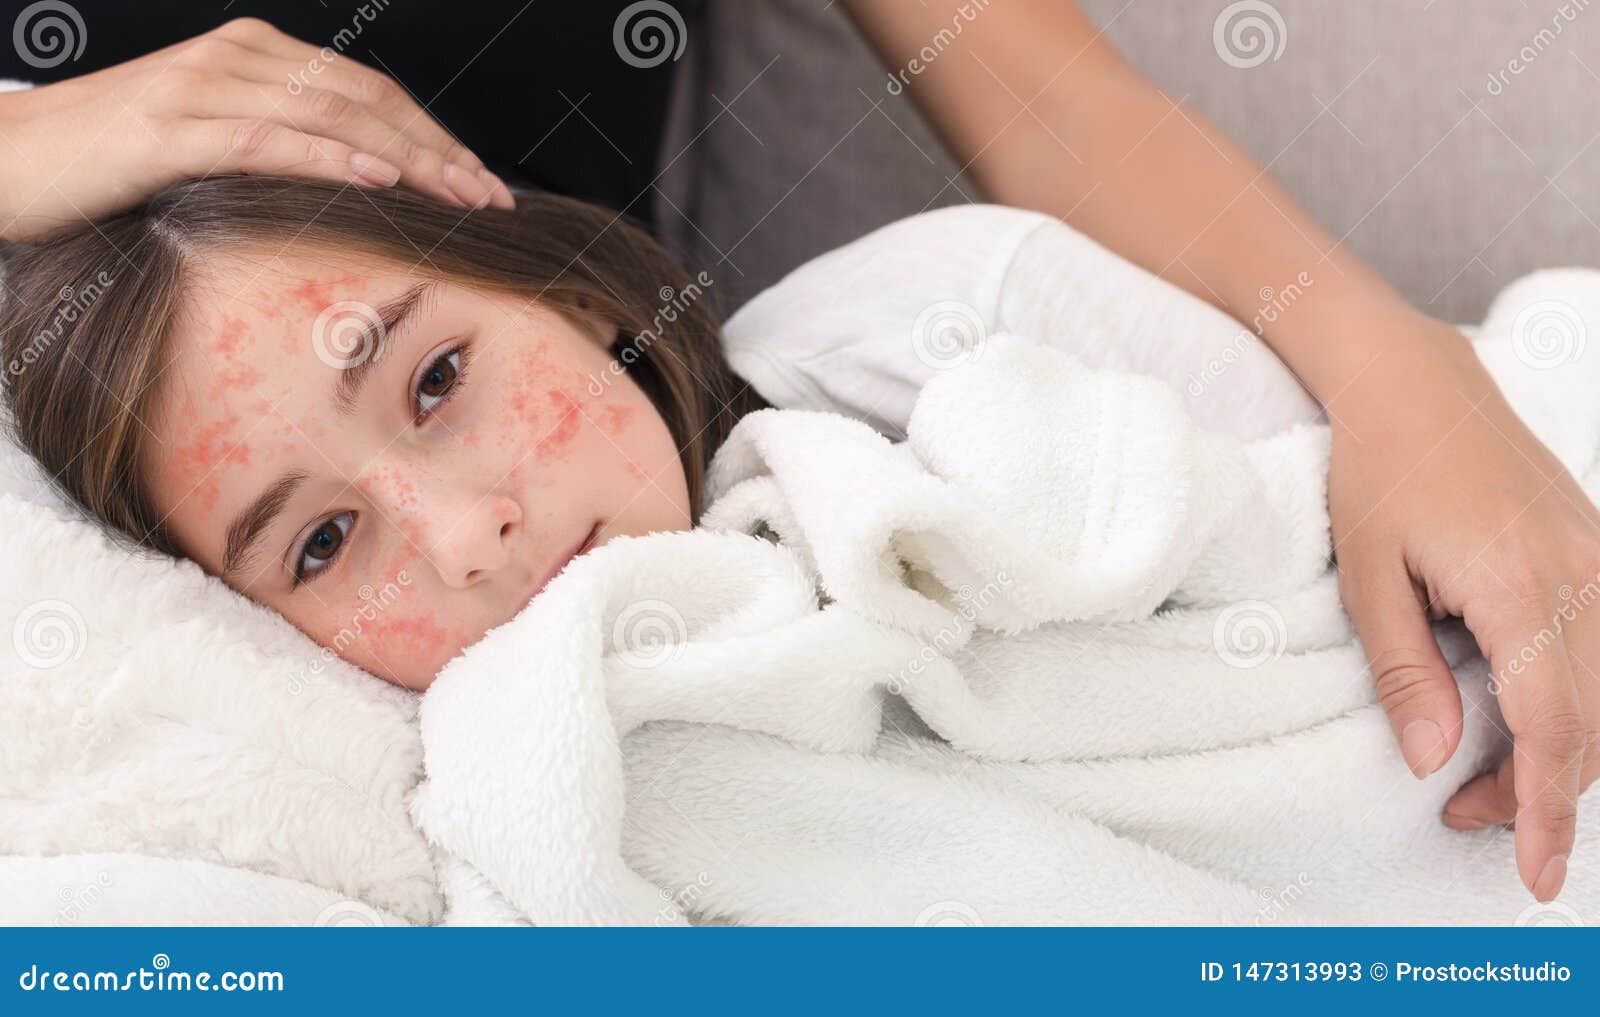 girl with measles virus lying on mother knees